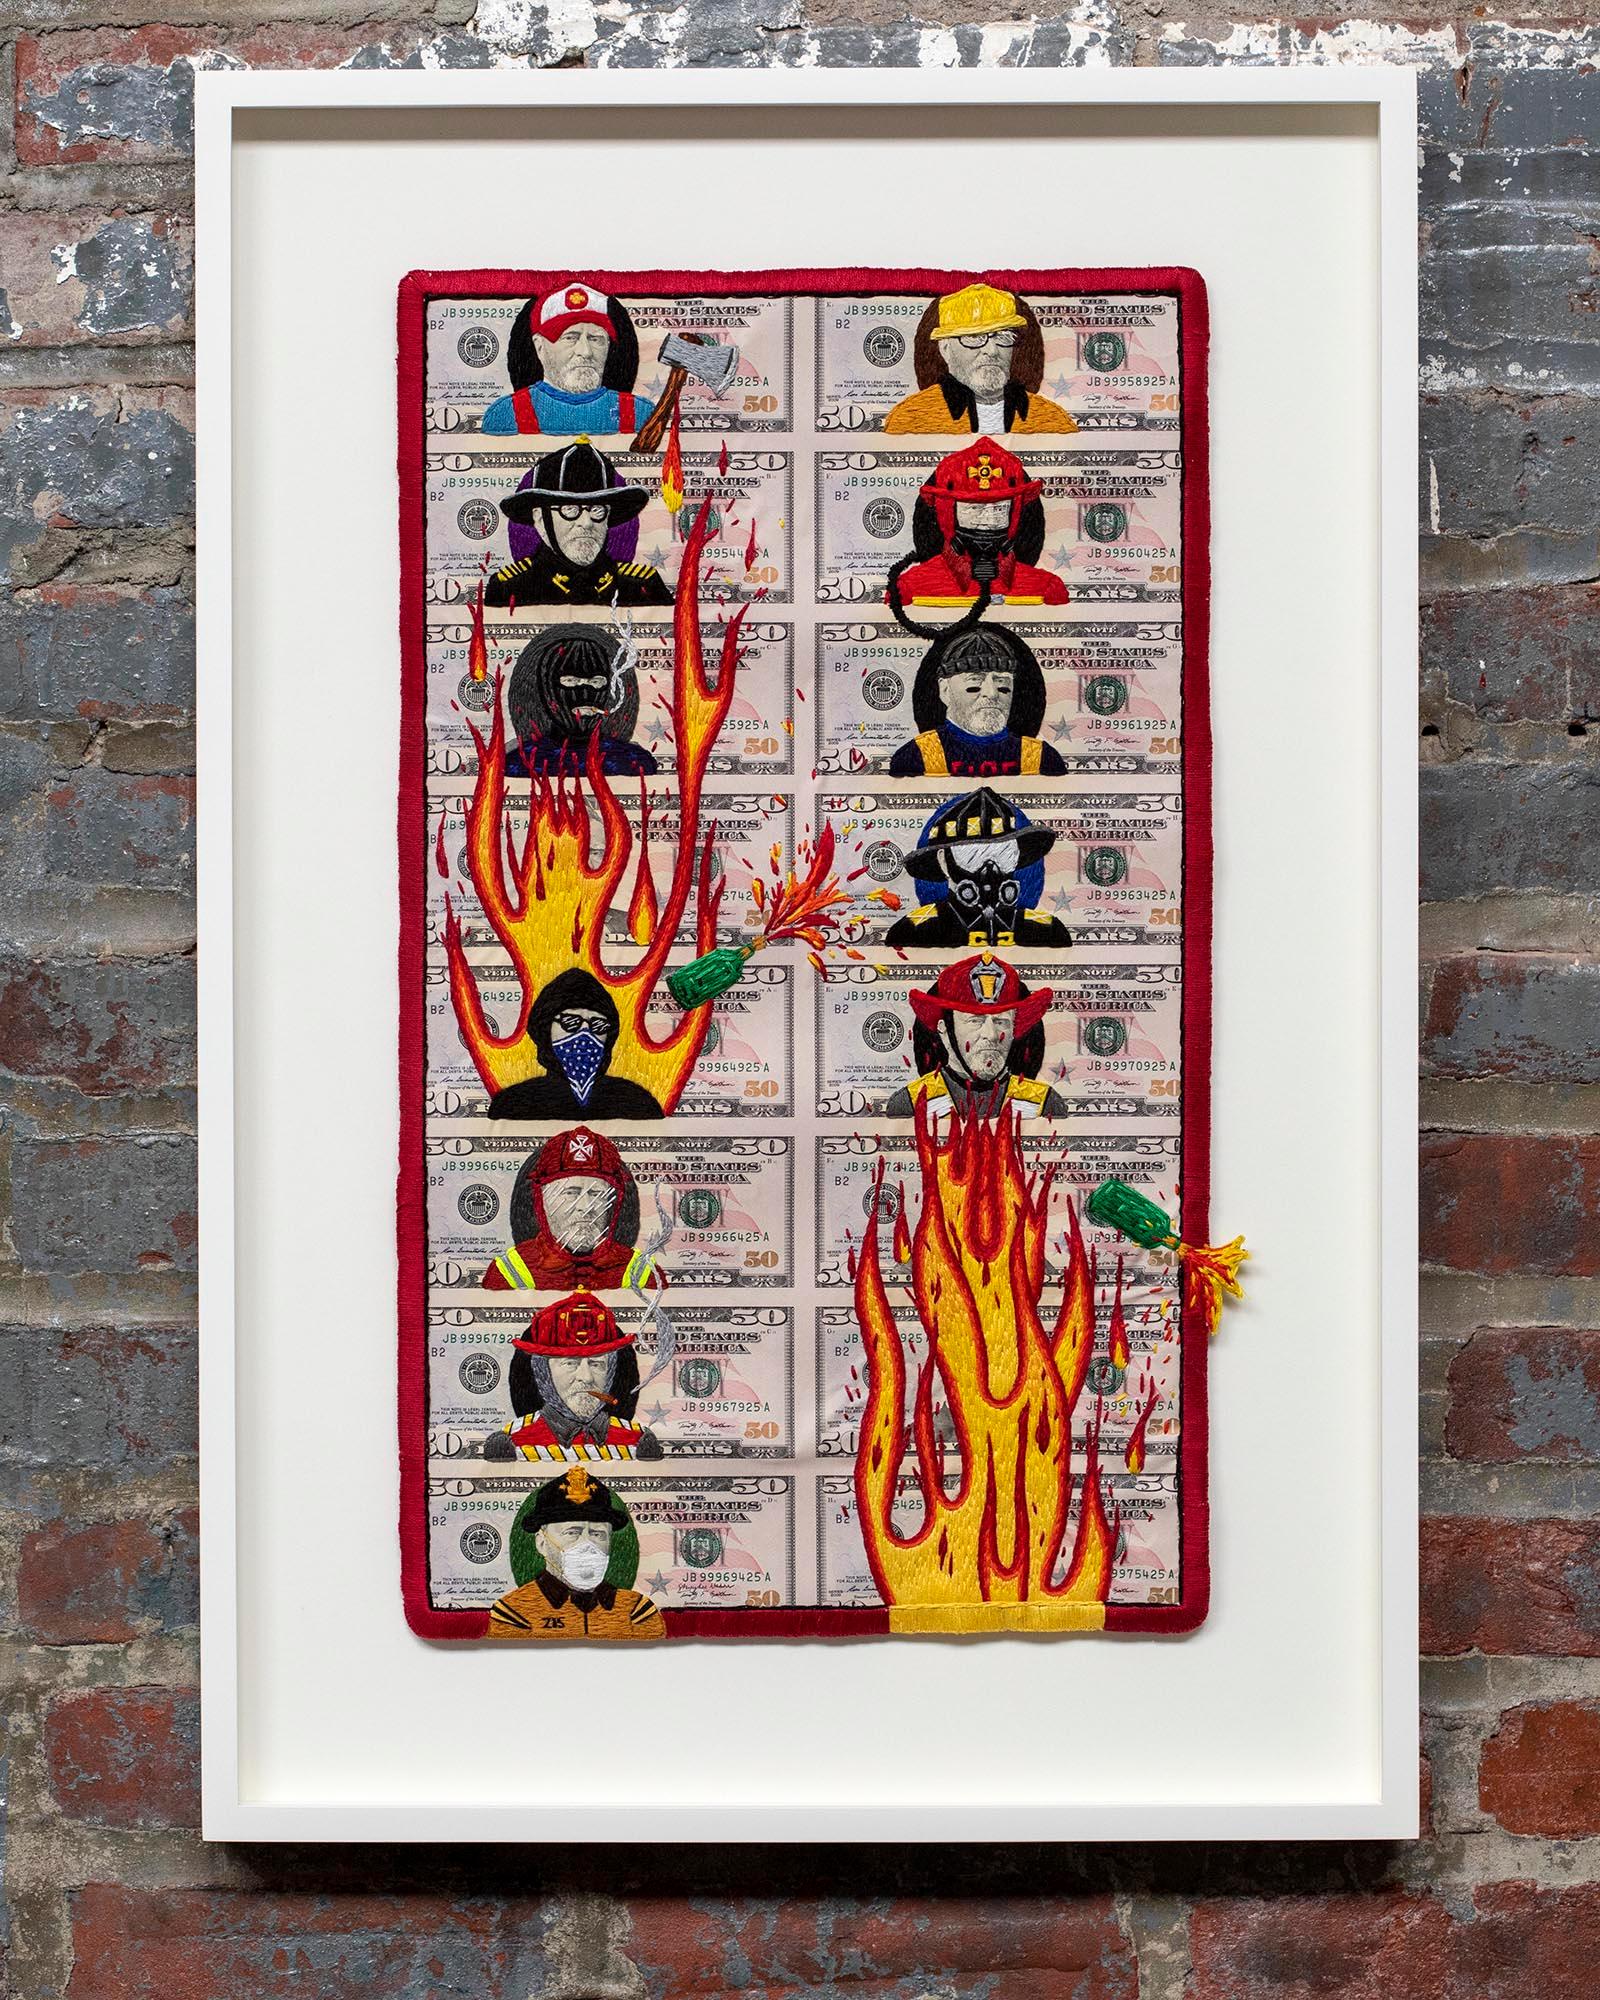 We The People: Grant Firemen - Mixed Media Art by Stacey Lee Webber